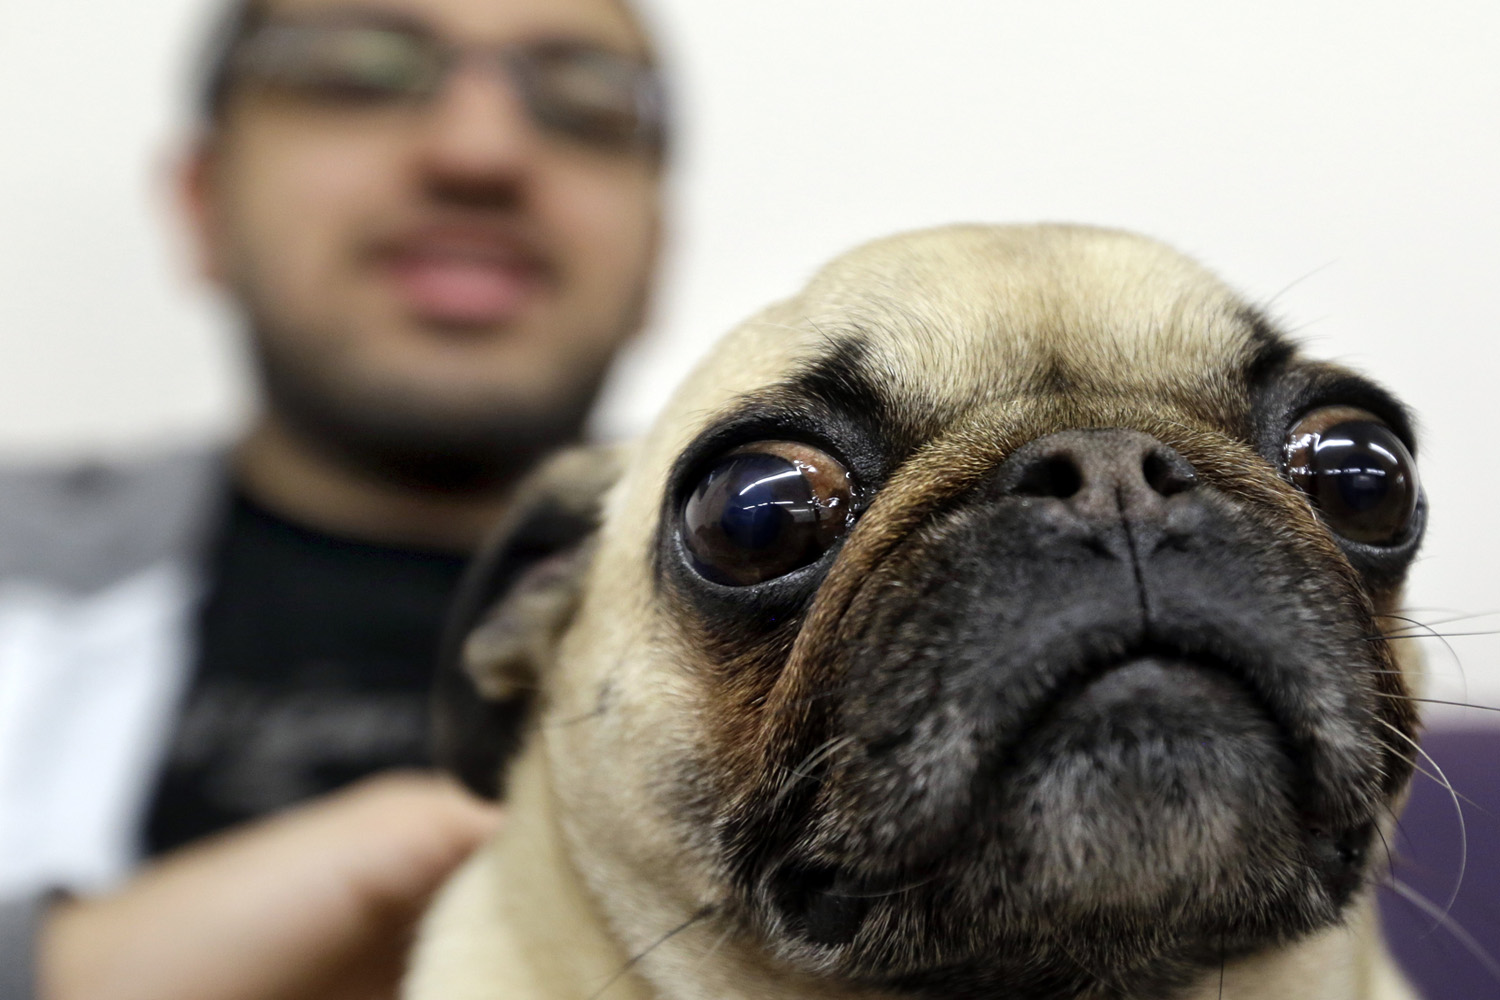 Student Kamran Mehta pets Angie, a certified therapy dog, at the University at Buffalo in Amherst, N.Y. (David Duprey/AP)